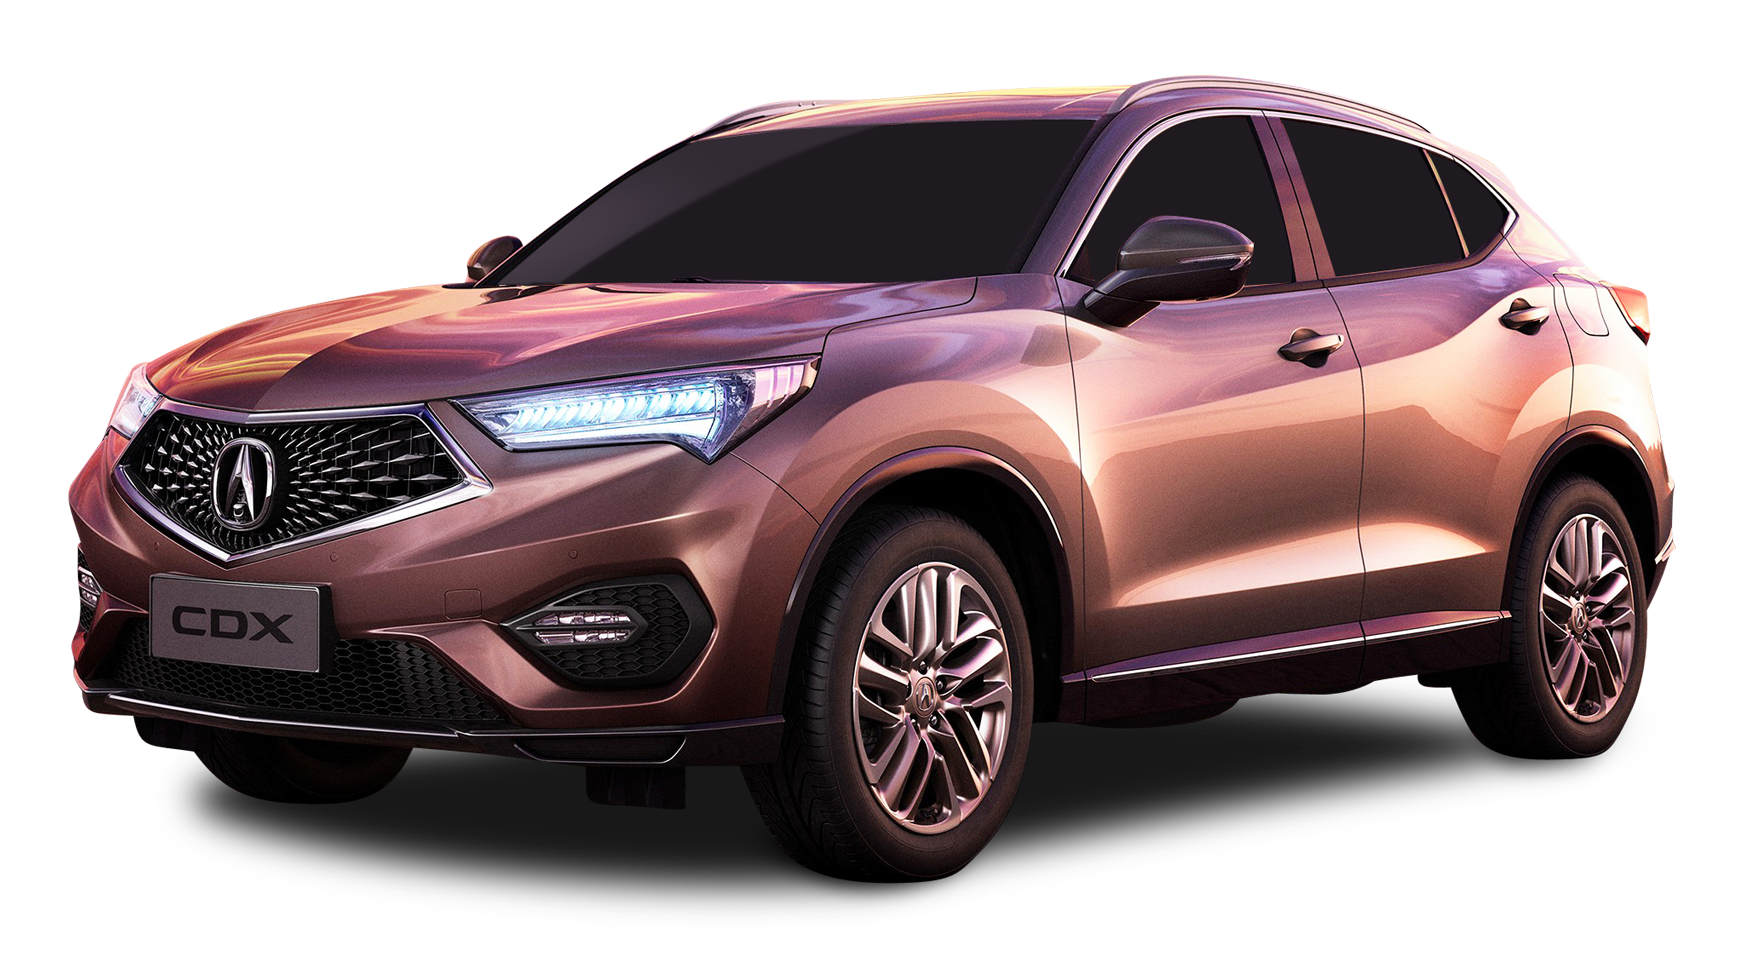 Brown Acura CDX Car PNG Image